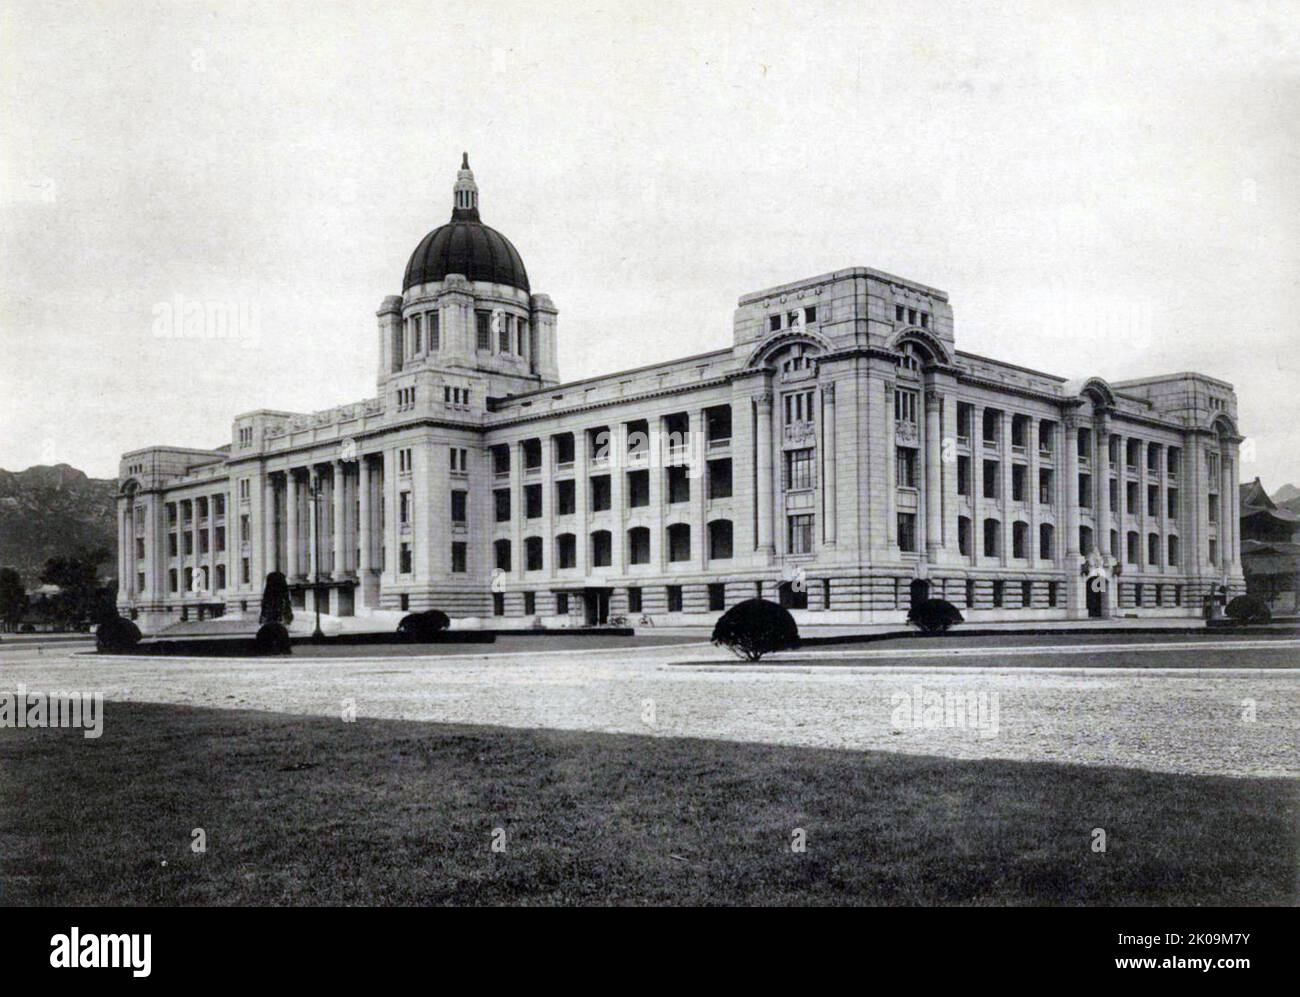 The Japanese General Government Building (Joseon-chongdokbu Cheongsa), also known as the Government-General Building and the Seoul Capitol, was a building located in Jongno District of Seoul, South Korea, from 1926 to 1996. Stock Photo